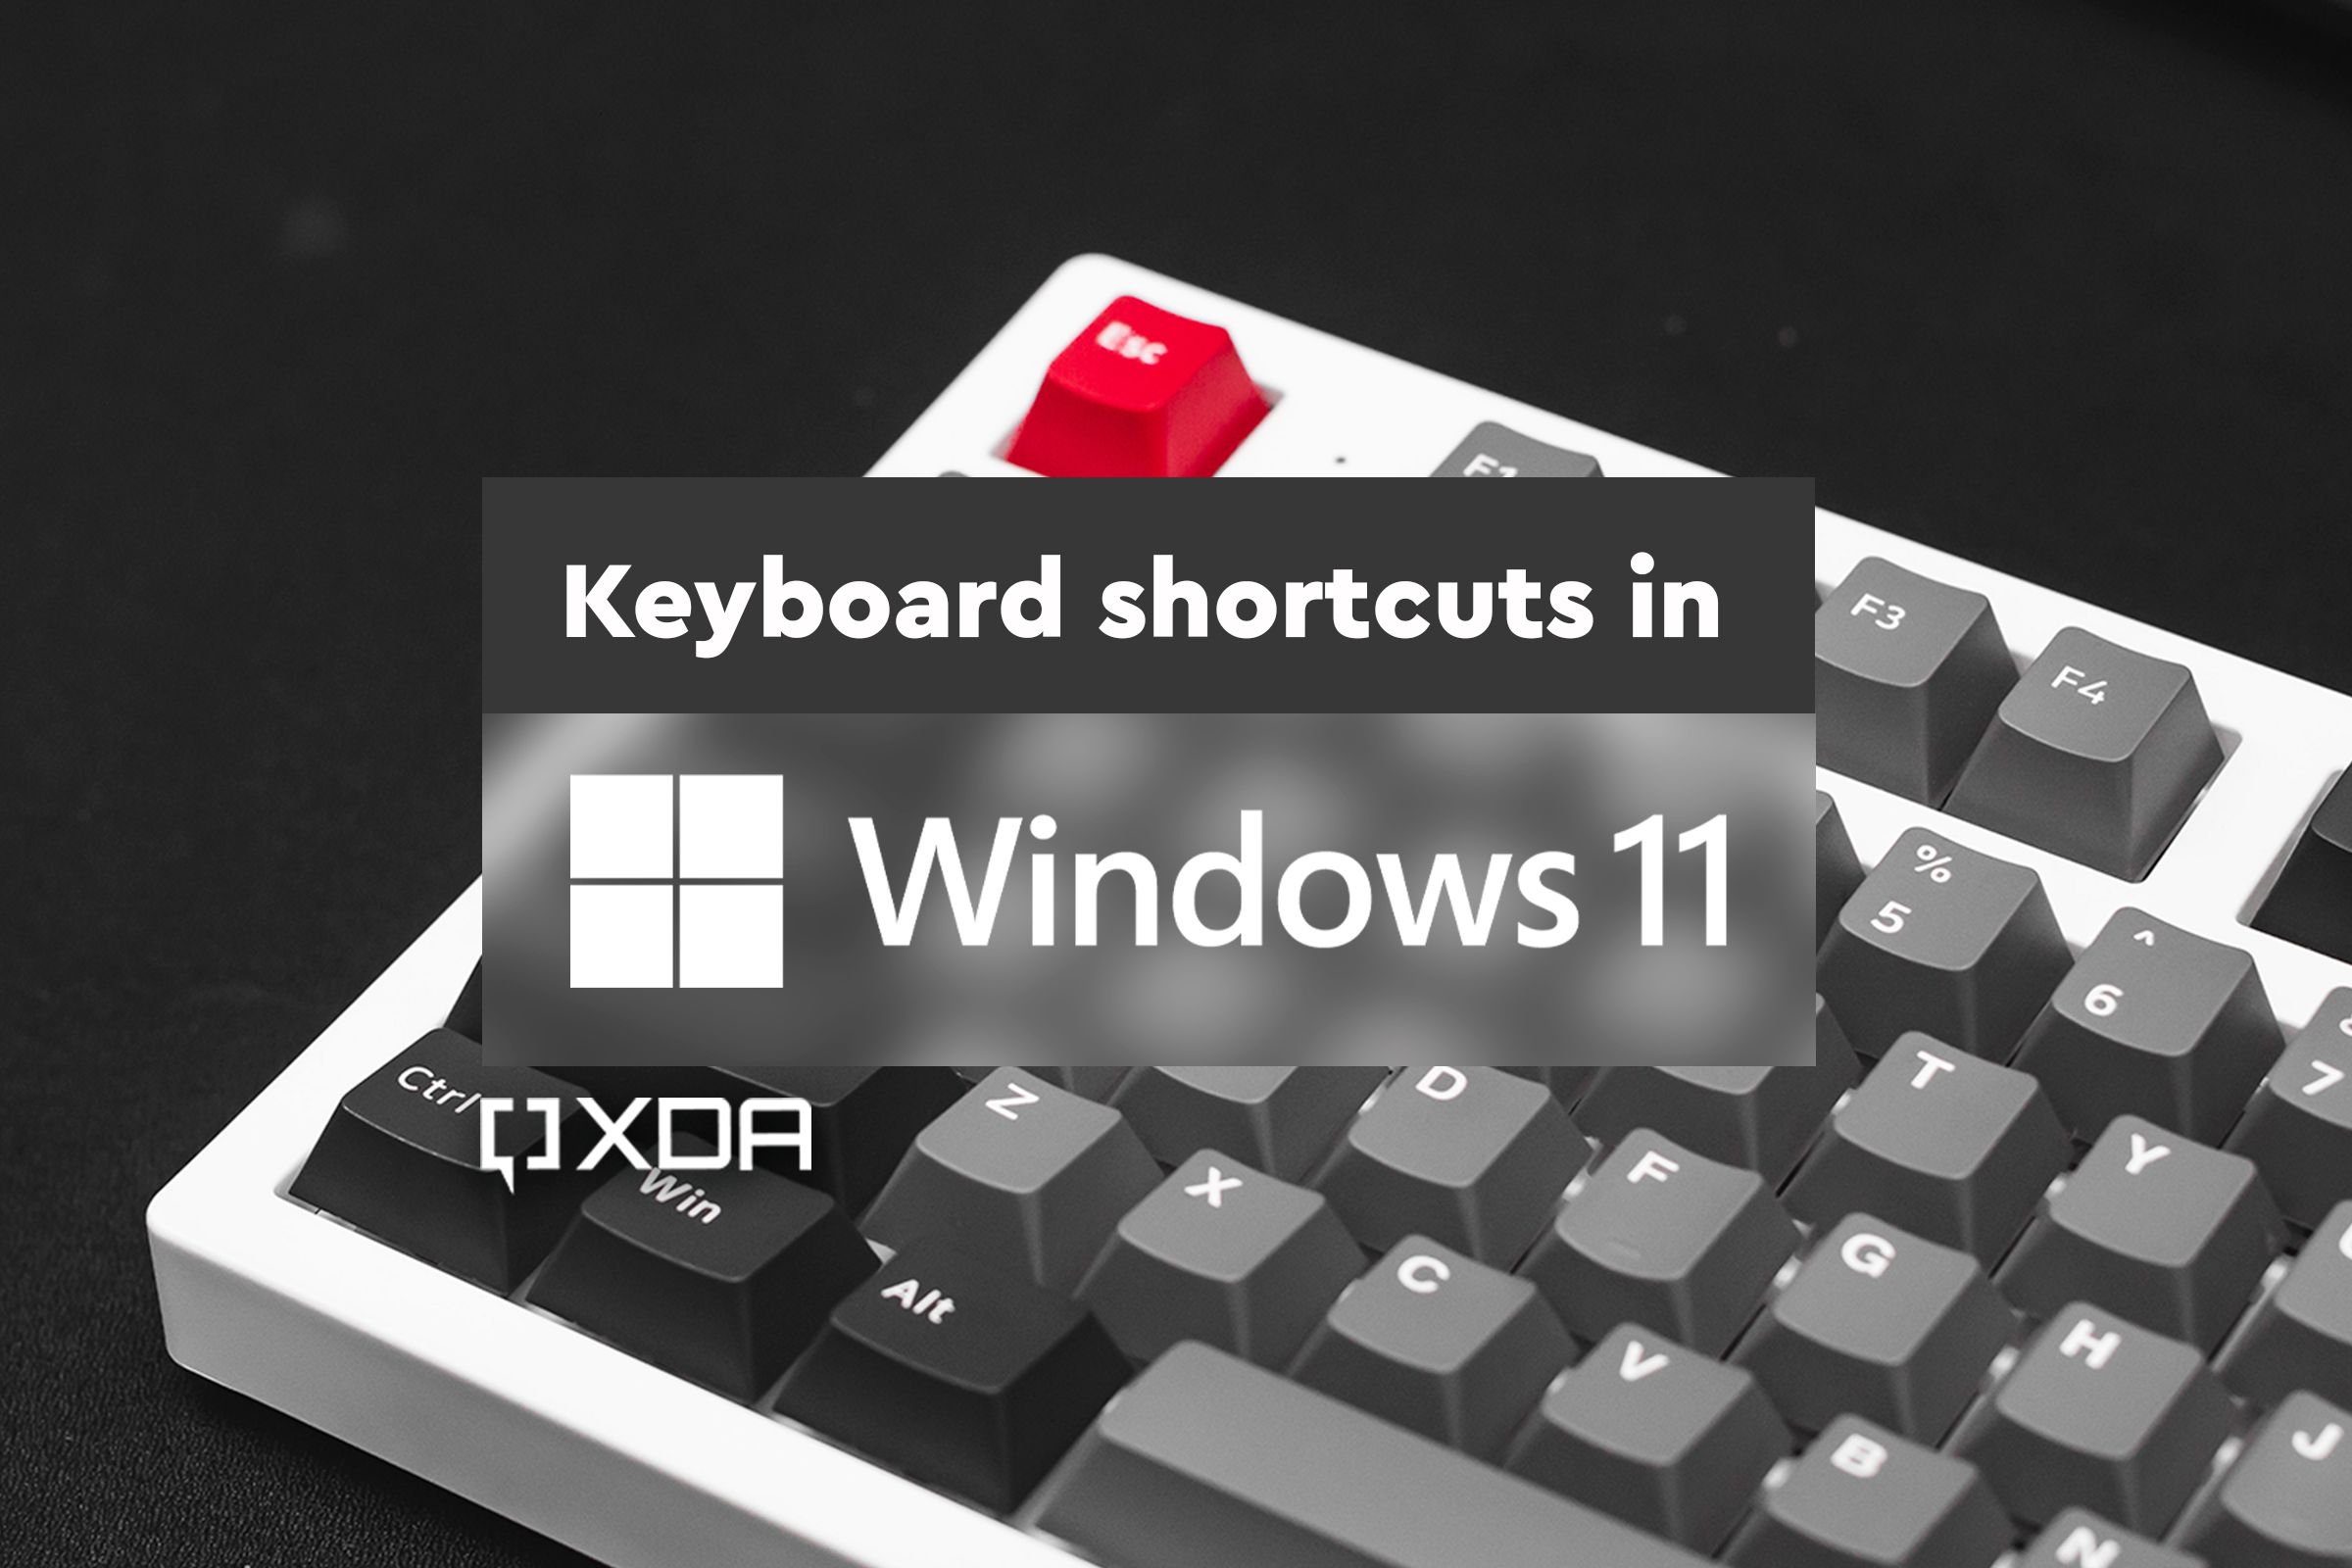 Shortcut key to refresh: What is the shortcut to refresh Windows